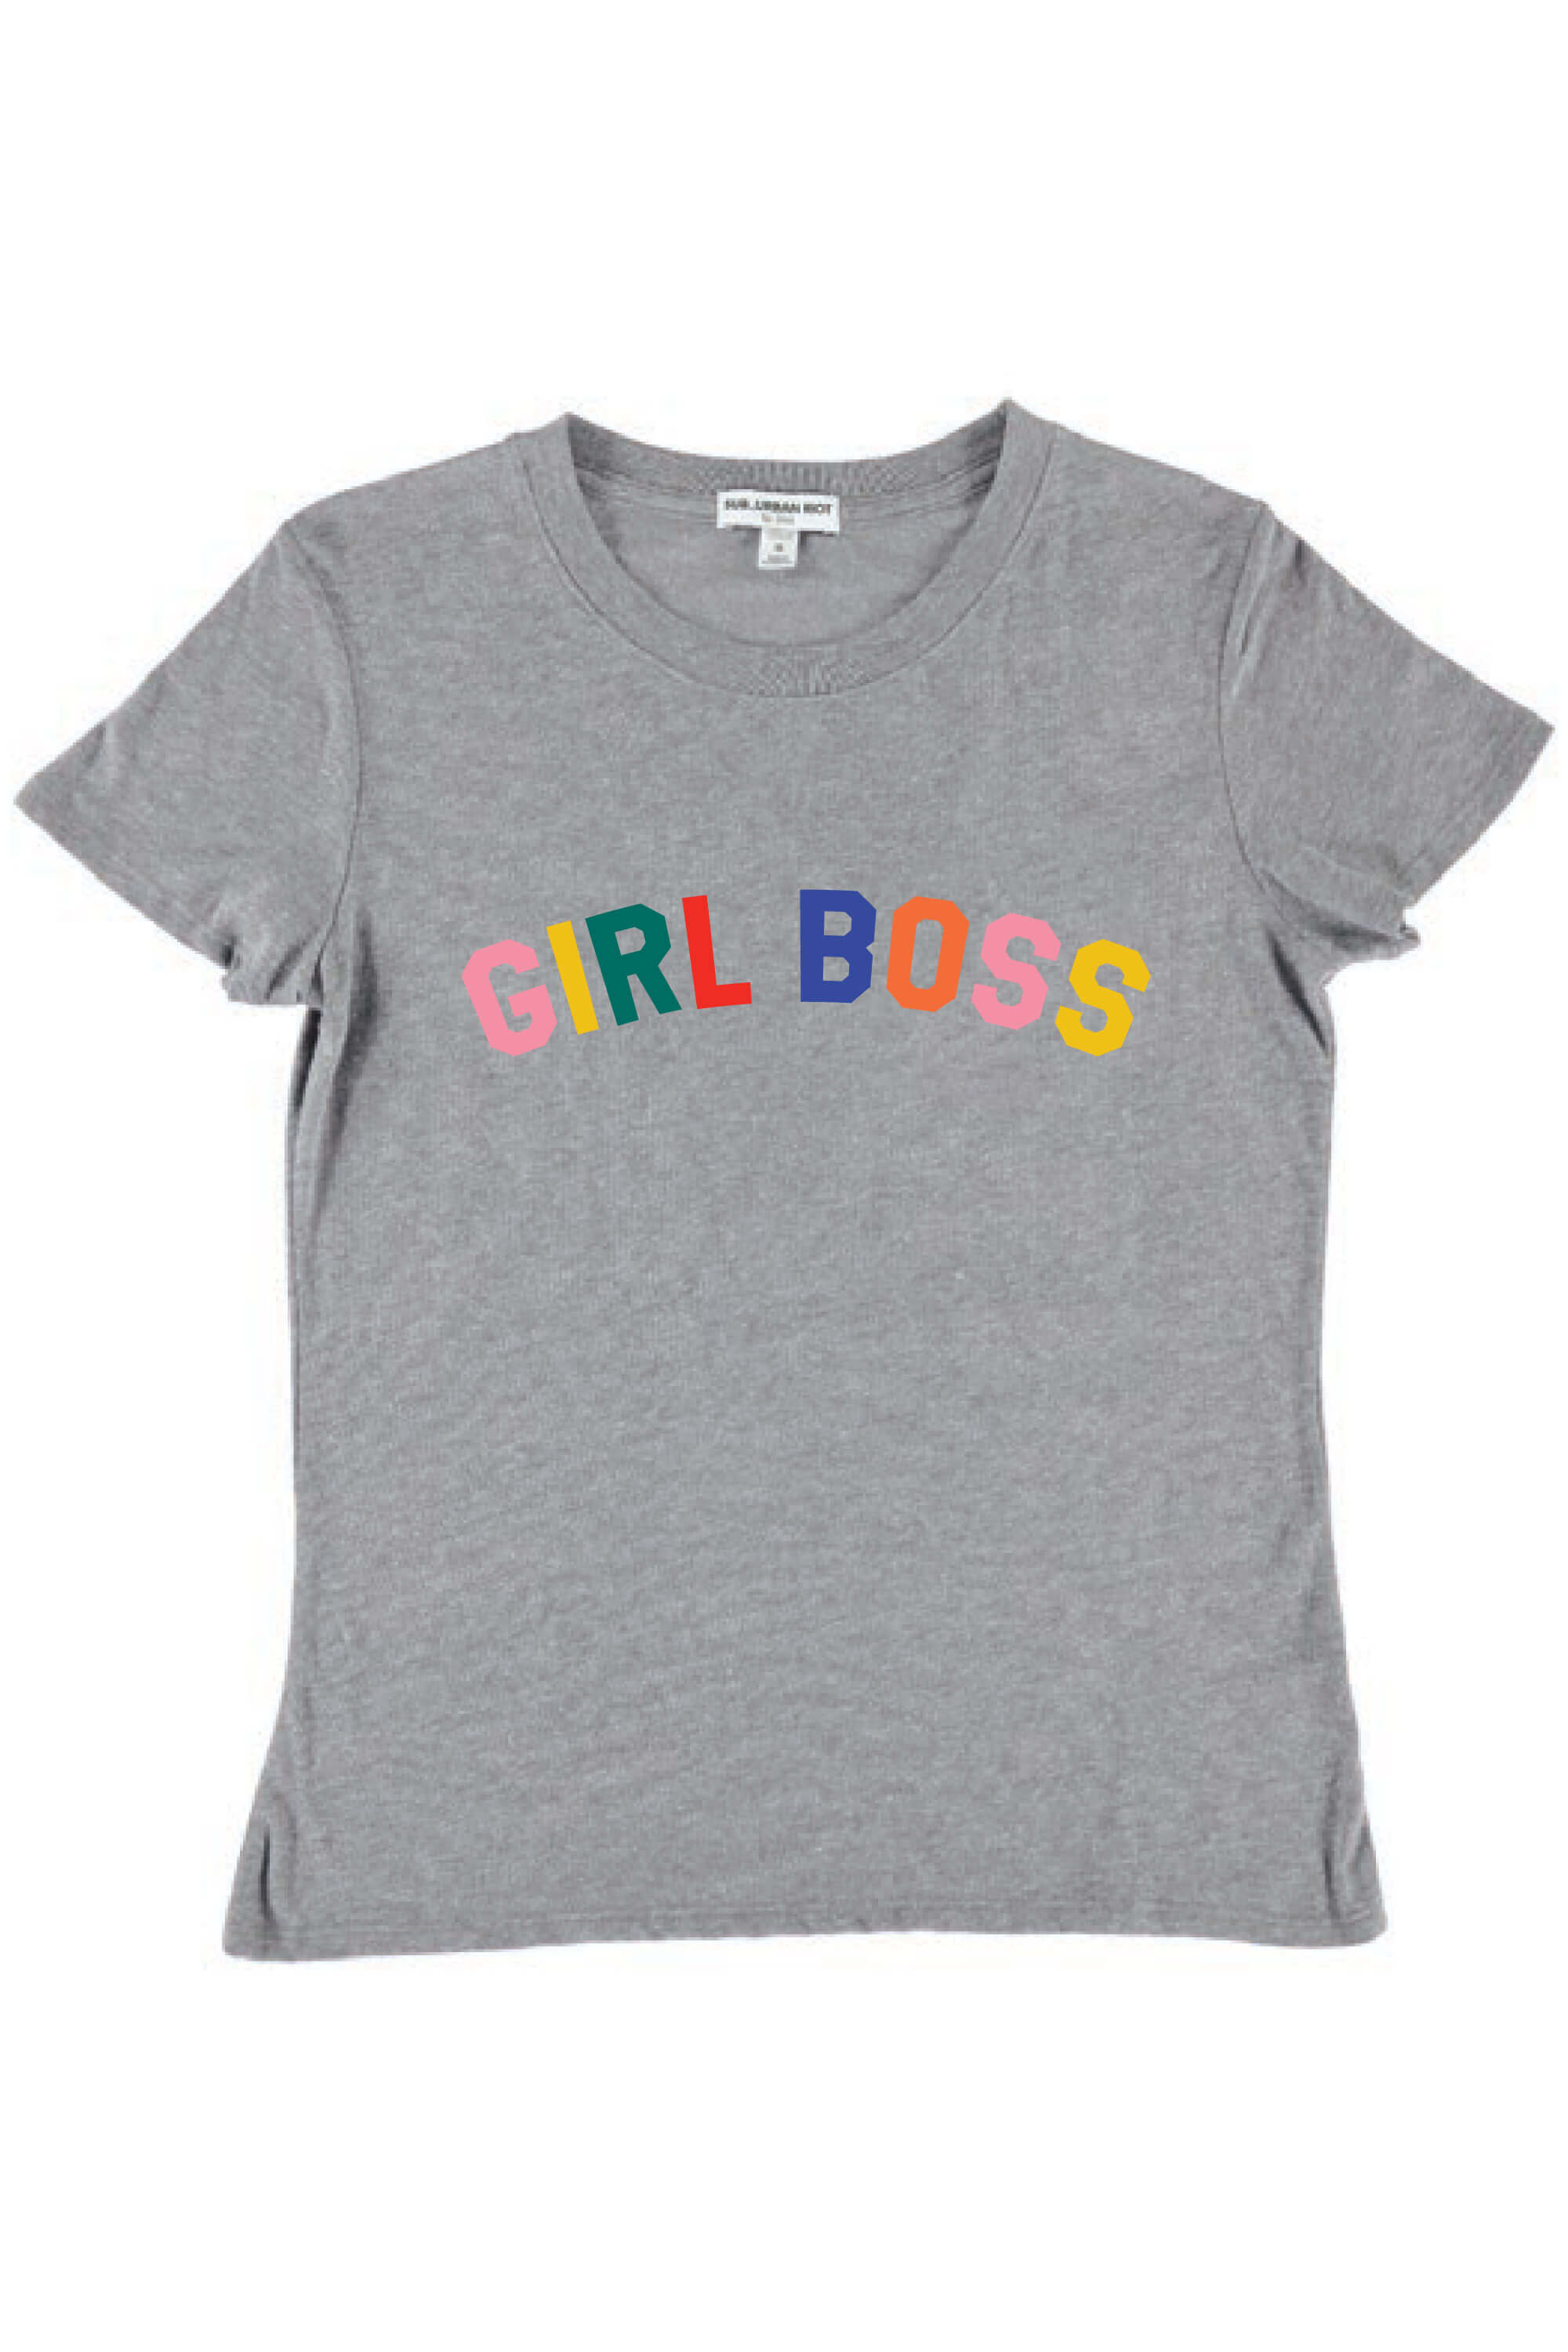 GIRL BOSS YOUTH SIZE LOOSE TEE